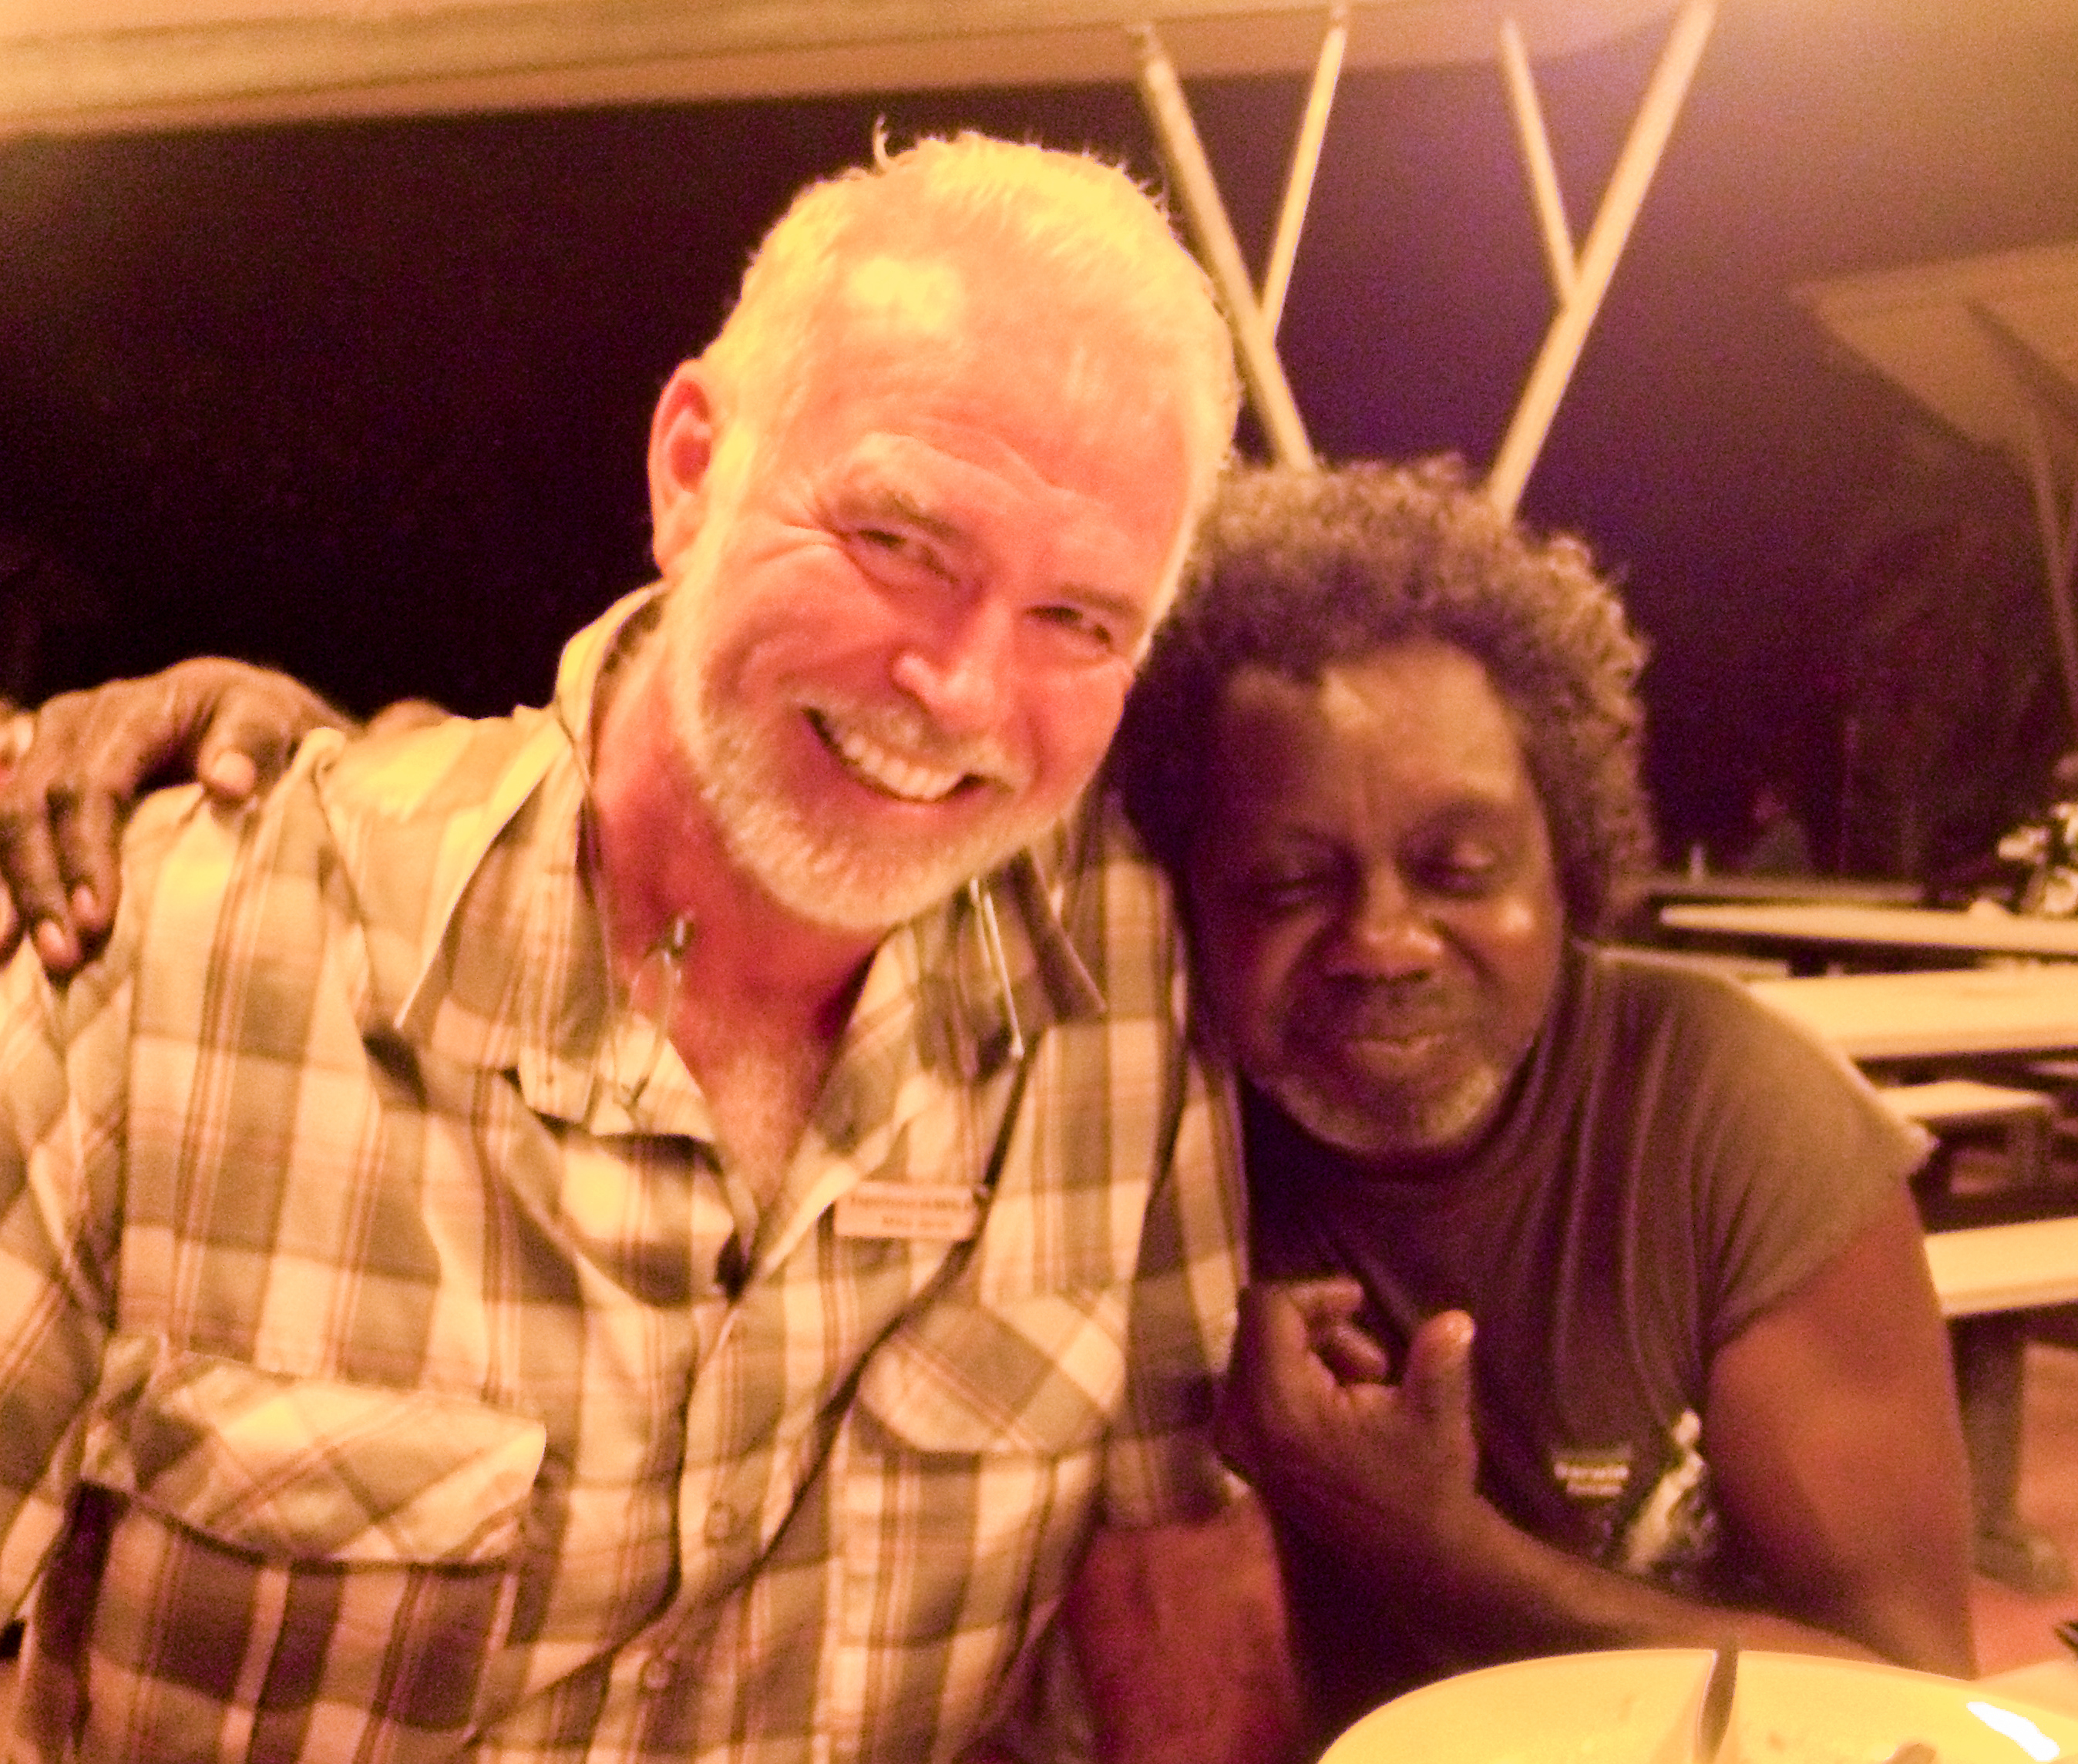 You never know who you might meet at dinner at Cooinda! Mike and Johnny Reid, local traditional owner © Barry Robinson